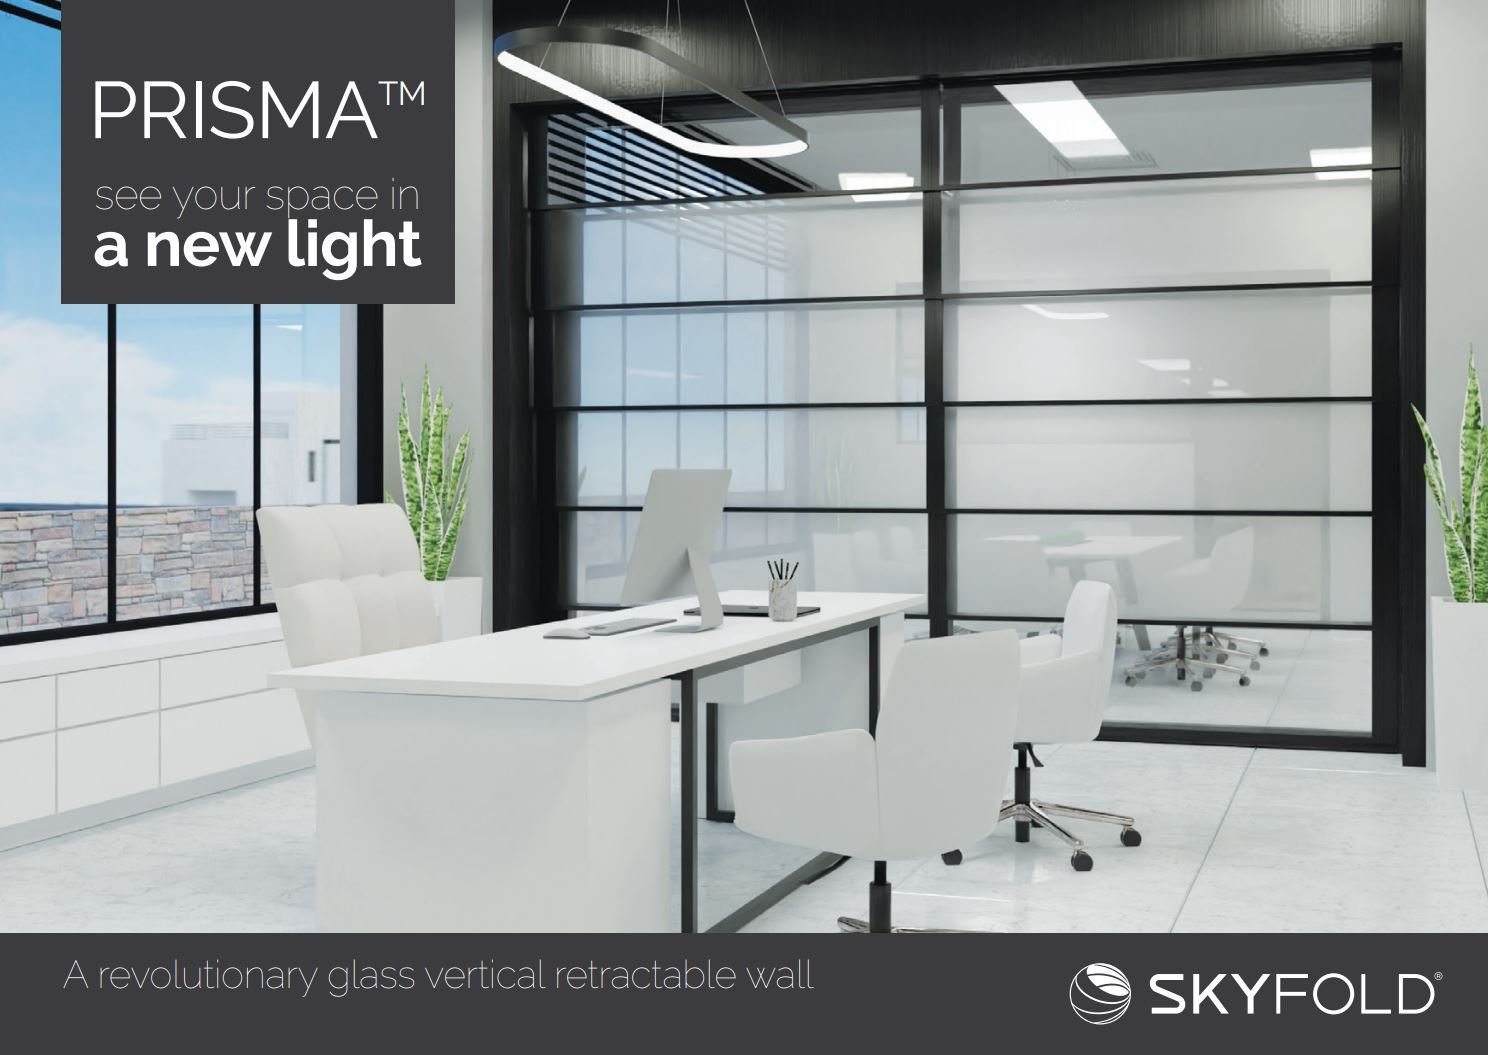 w l hall company skyfold Prisma™ Glass Vertical Partitions